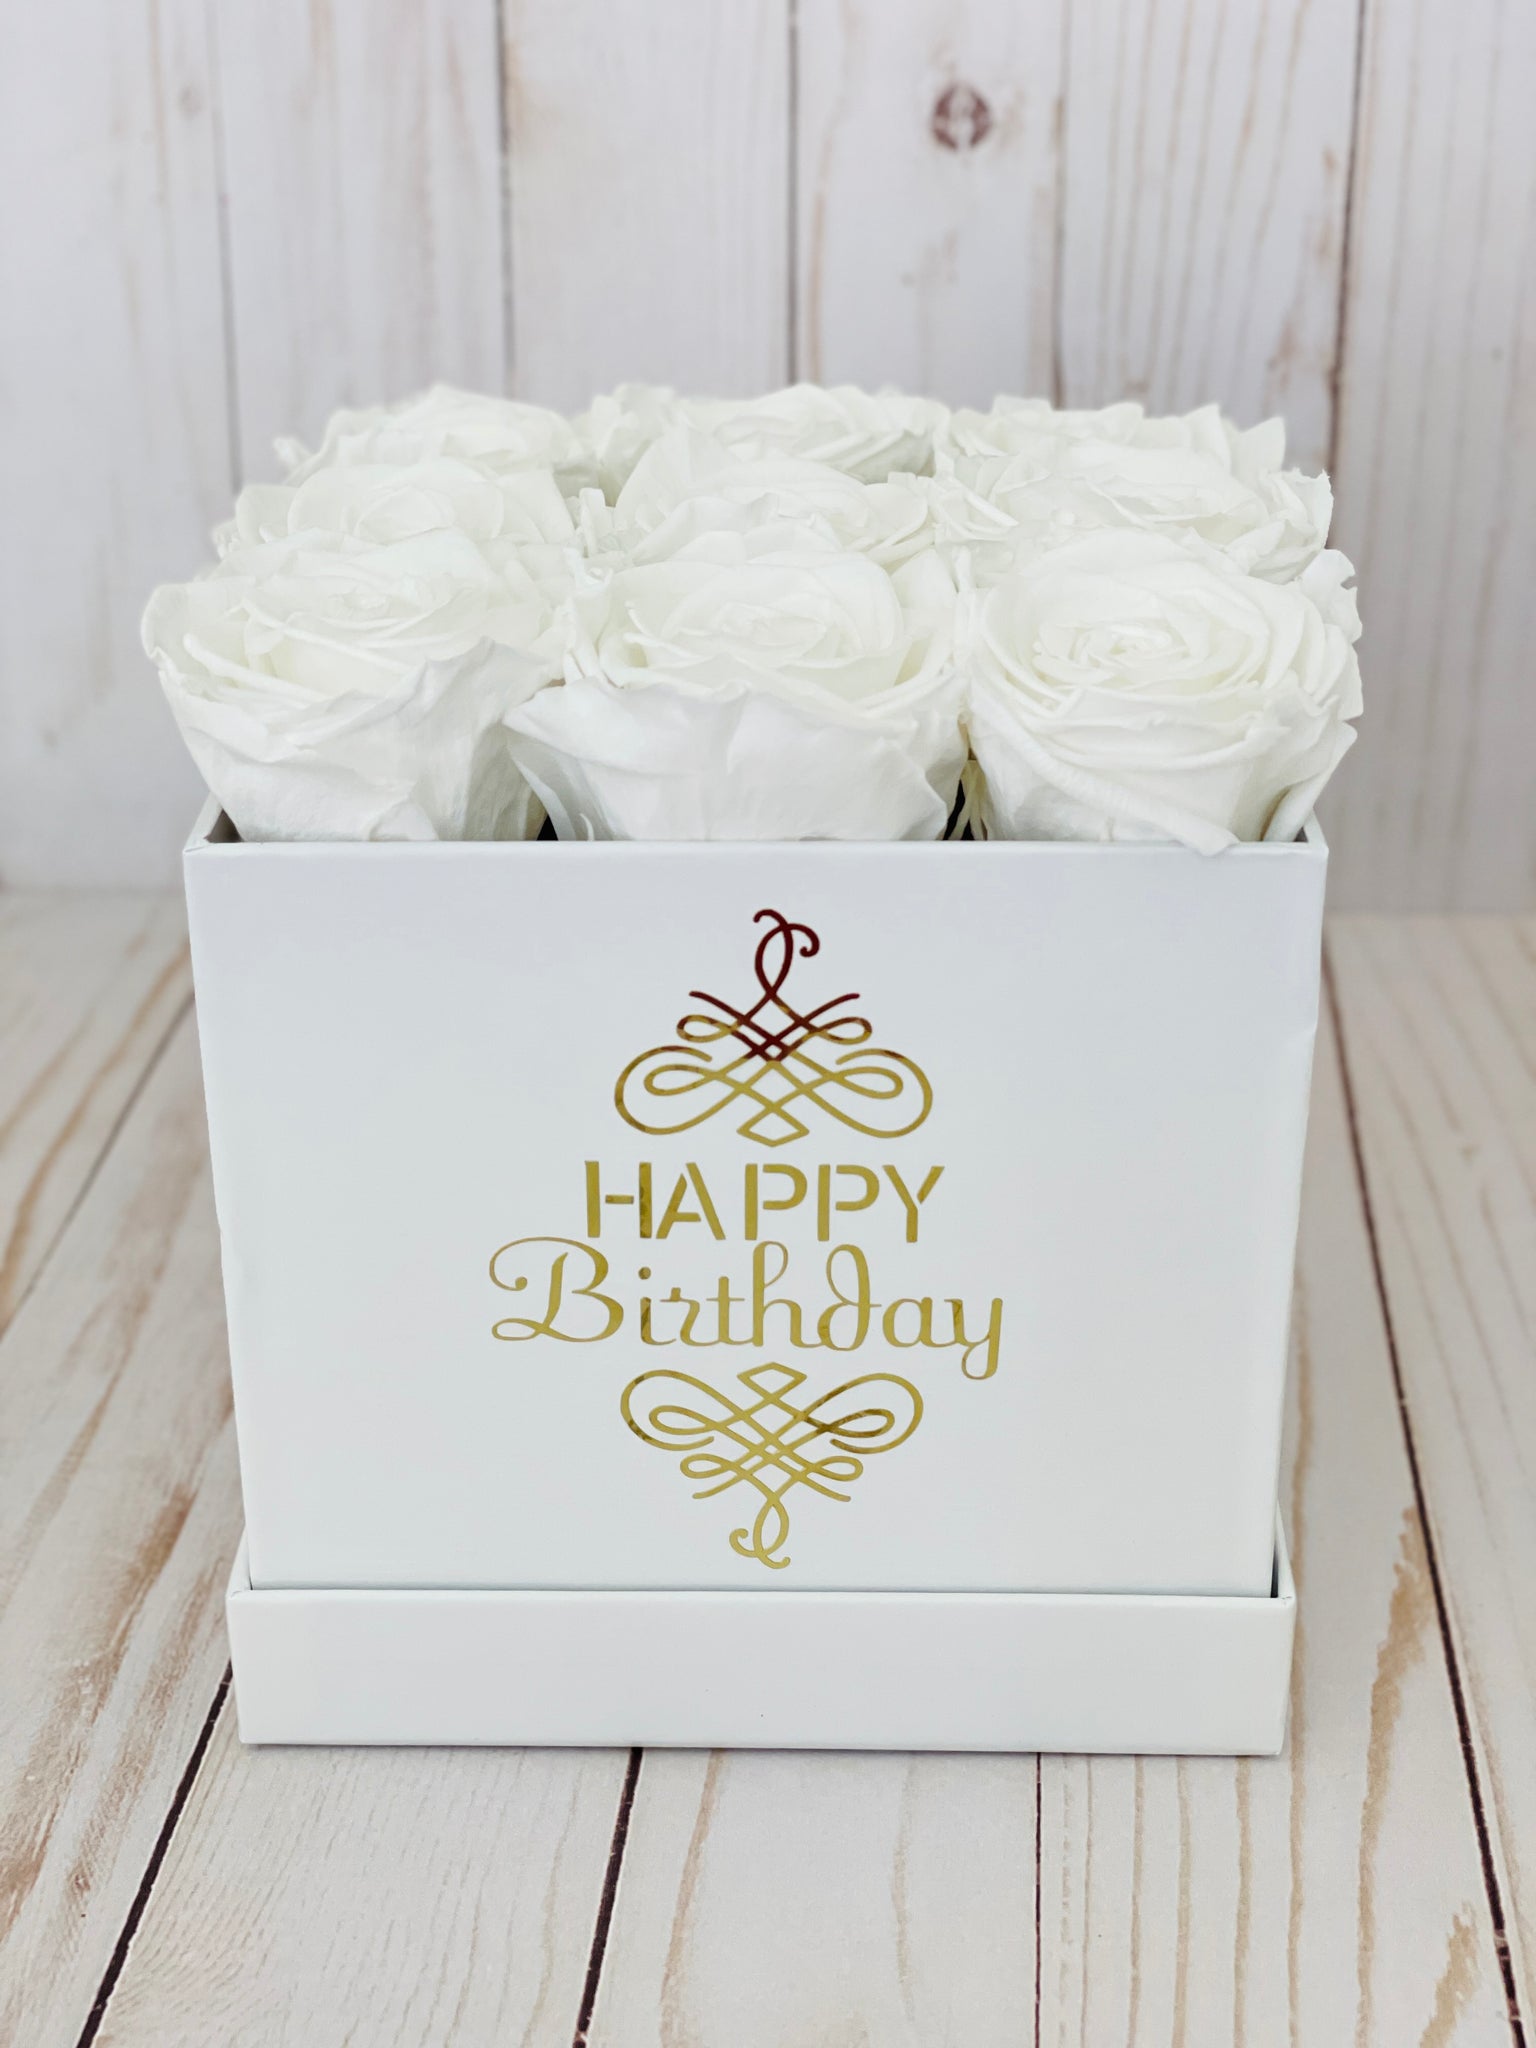 5 Reasons Why Flowers Make the Best Birthday Gifts